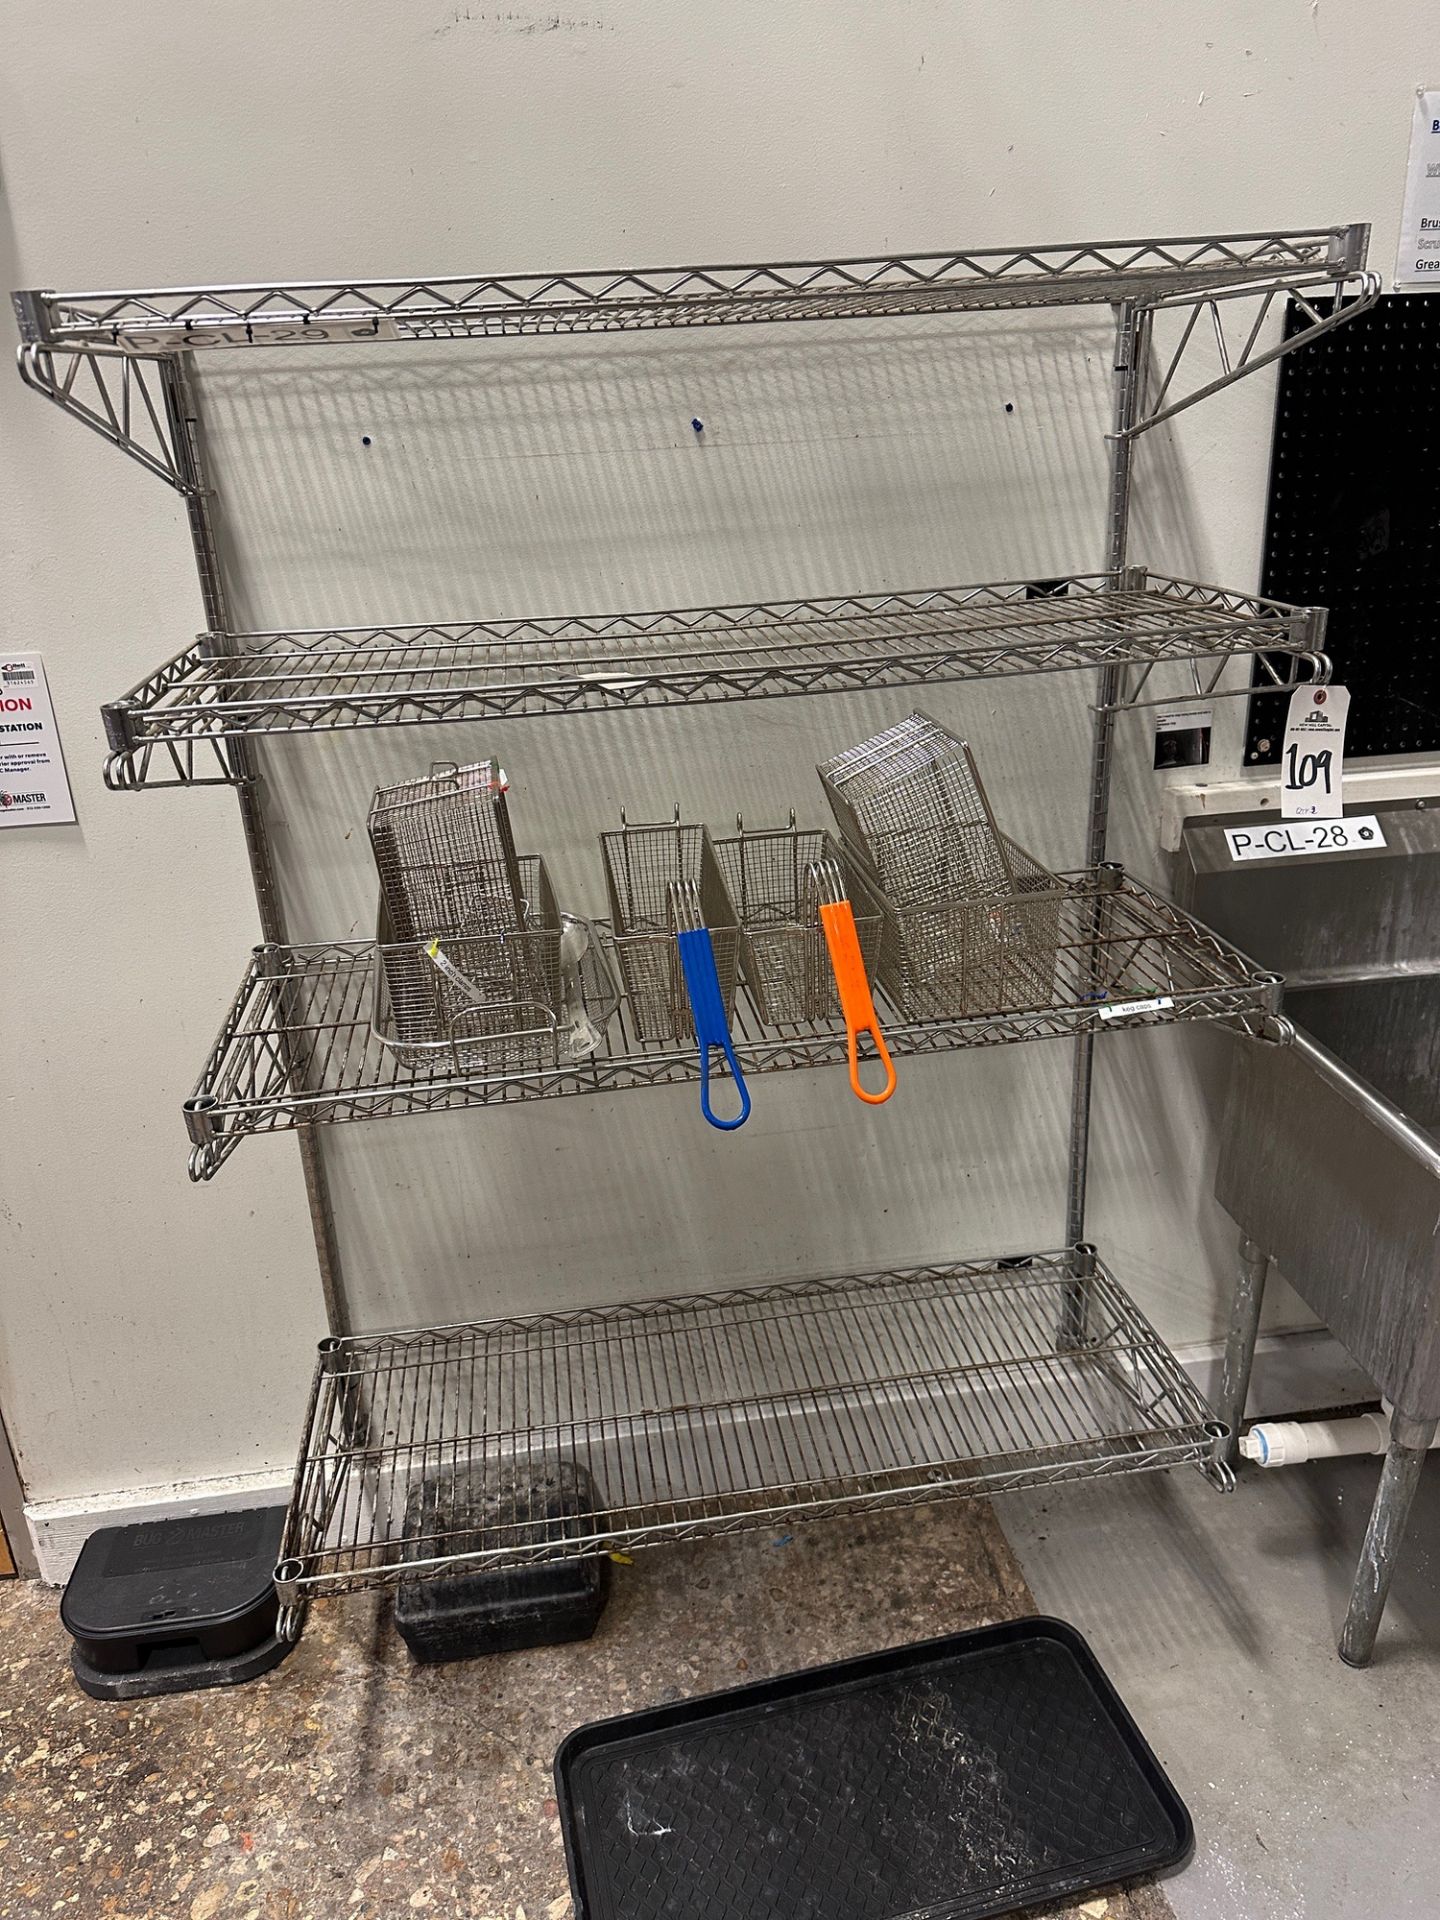 Lot of (2) 4-Shelf Wall Hung Wire Shelving Units (Approx. 4'x 18") and (1) 3' x 14" | Rig Fee $50